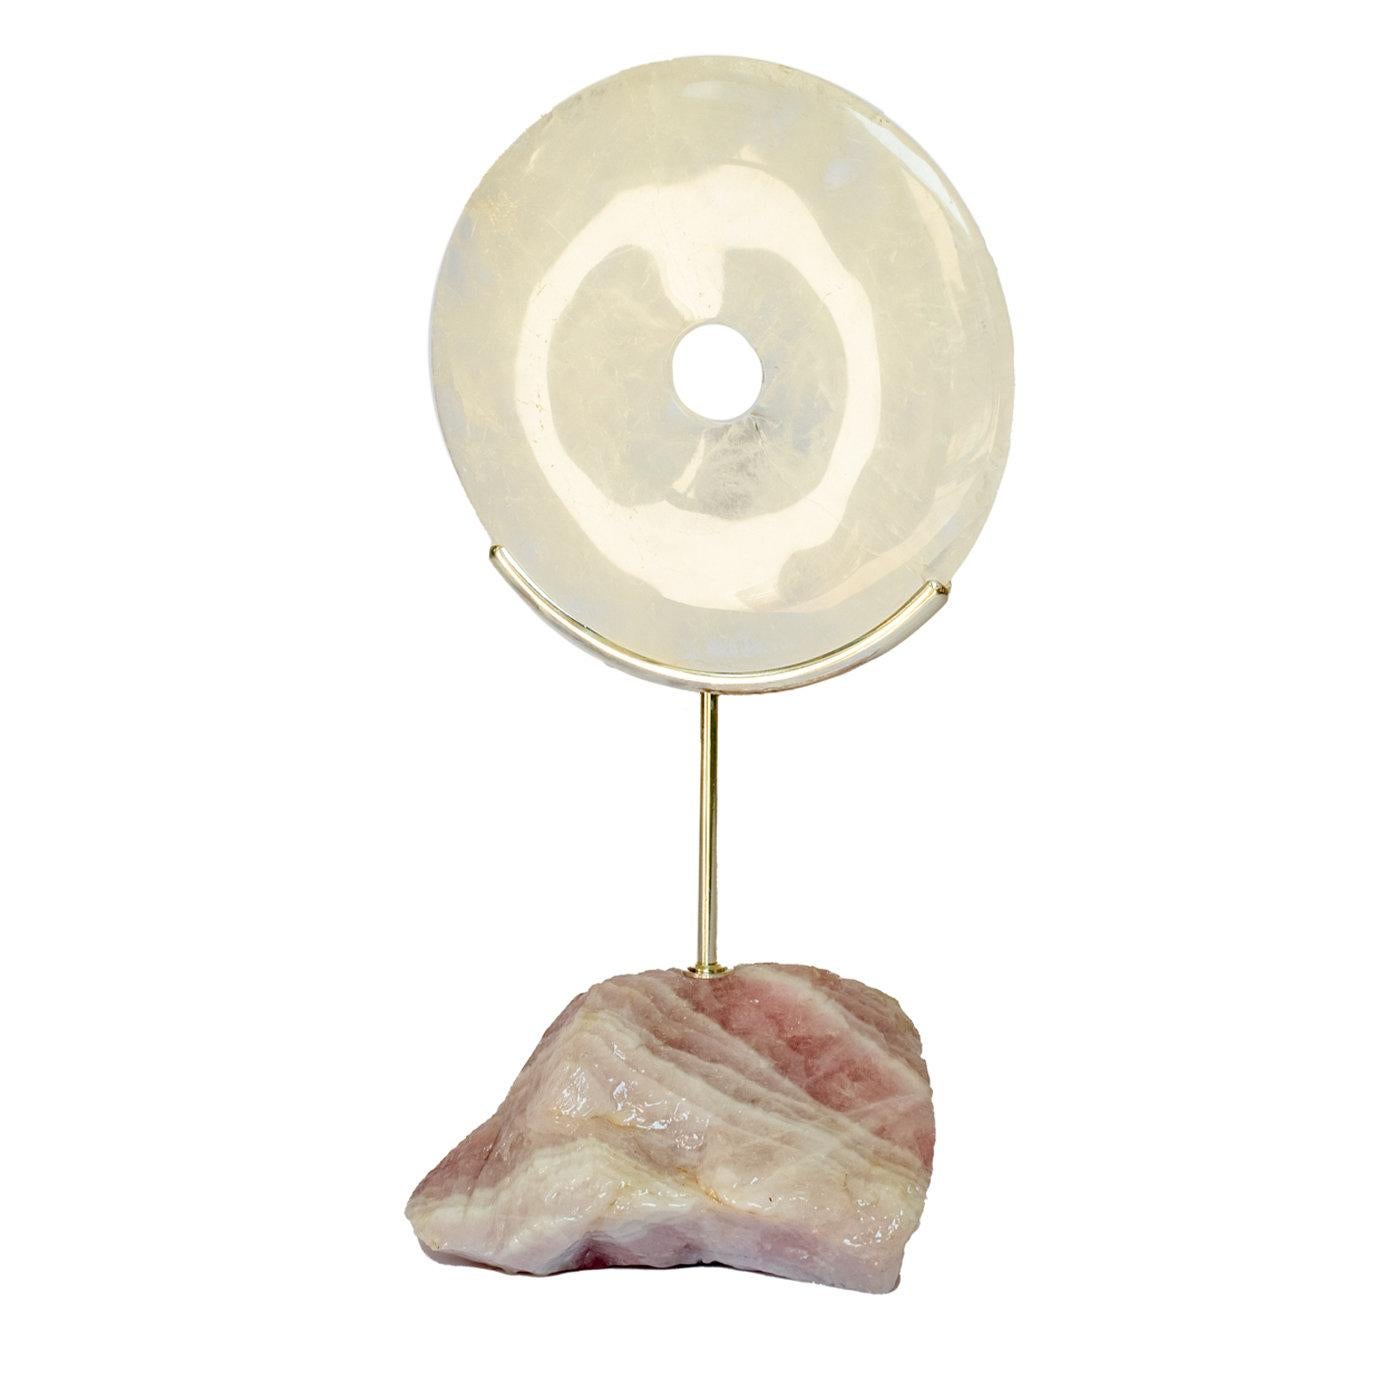 This astonishing Pi disk is inspired by the ancient Chinese tradition, representing eternity, the sun and sky, and courage and honor. The carved piece features as flat, clear quartz crystal disk with a circular hole in the center, a slender